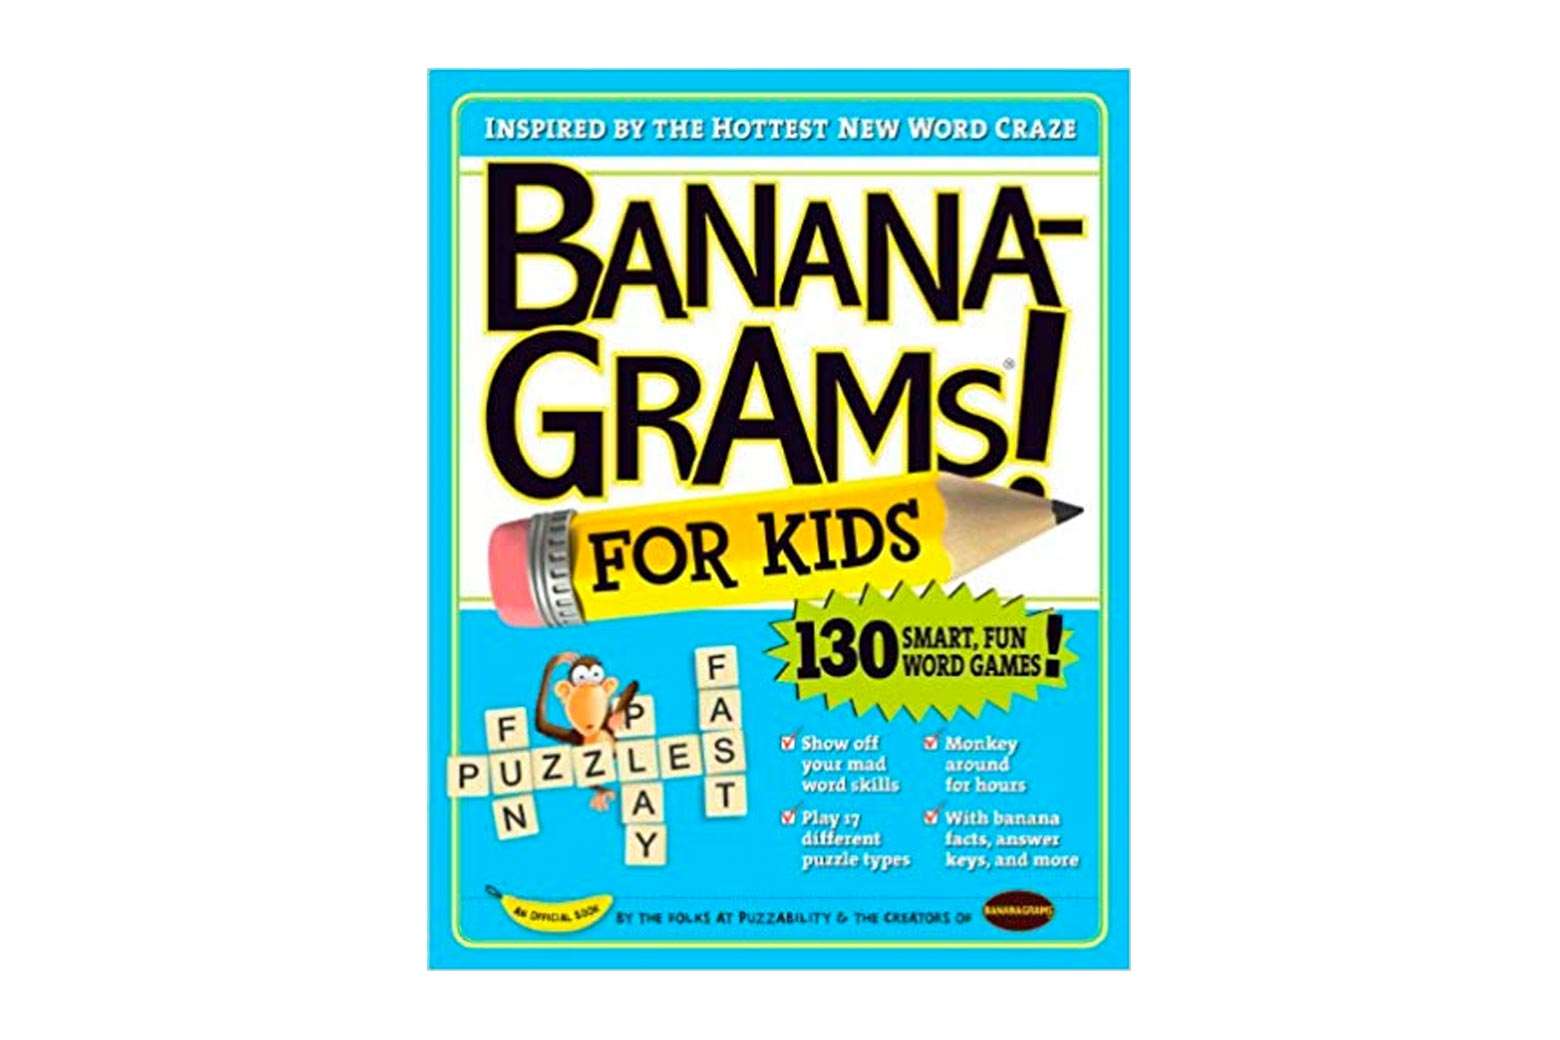 Bananagrams for Kids book cover